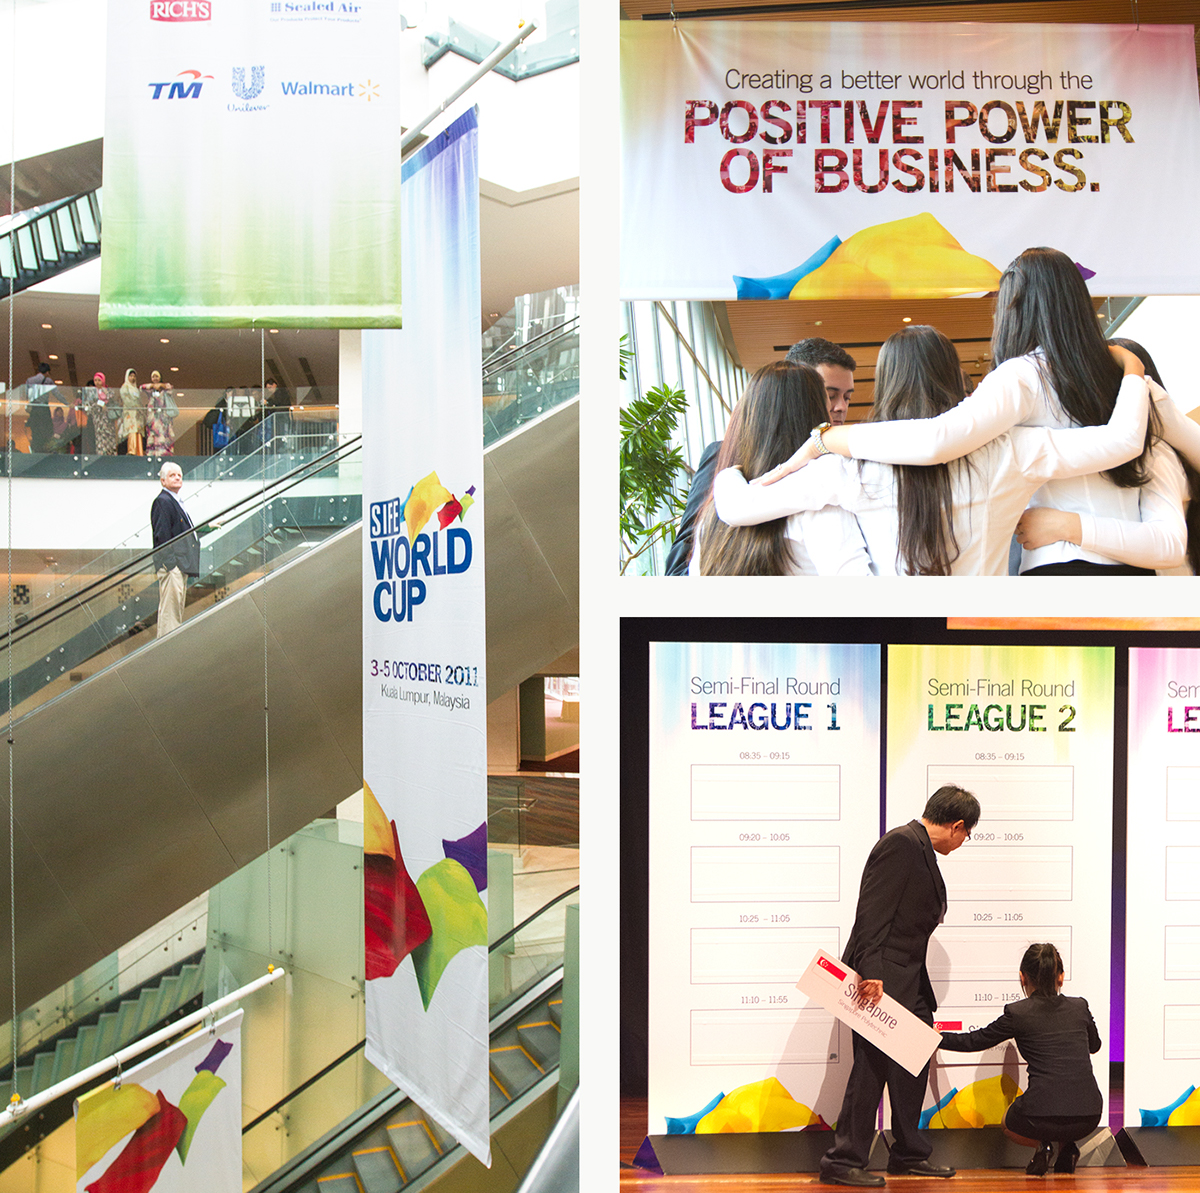 world cup SIFE enactus flags Event Exhibition  logo Collateral Global